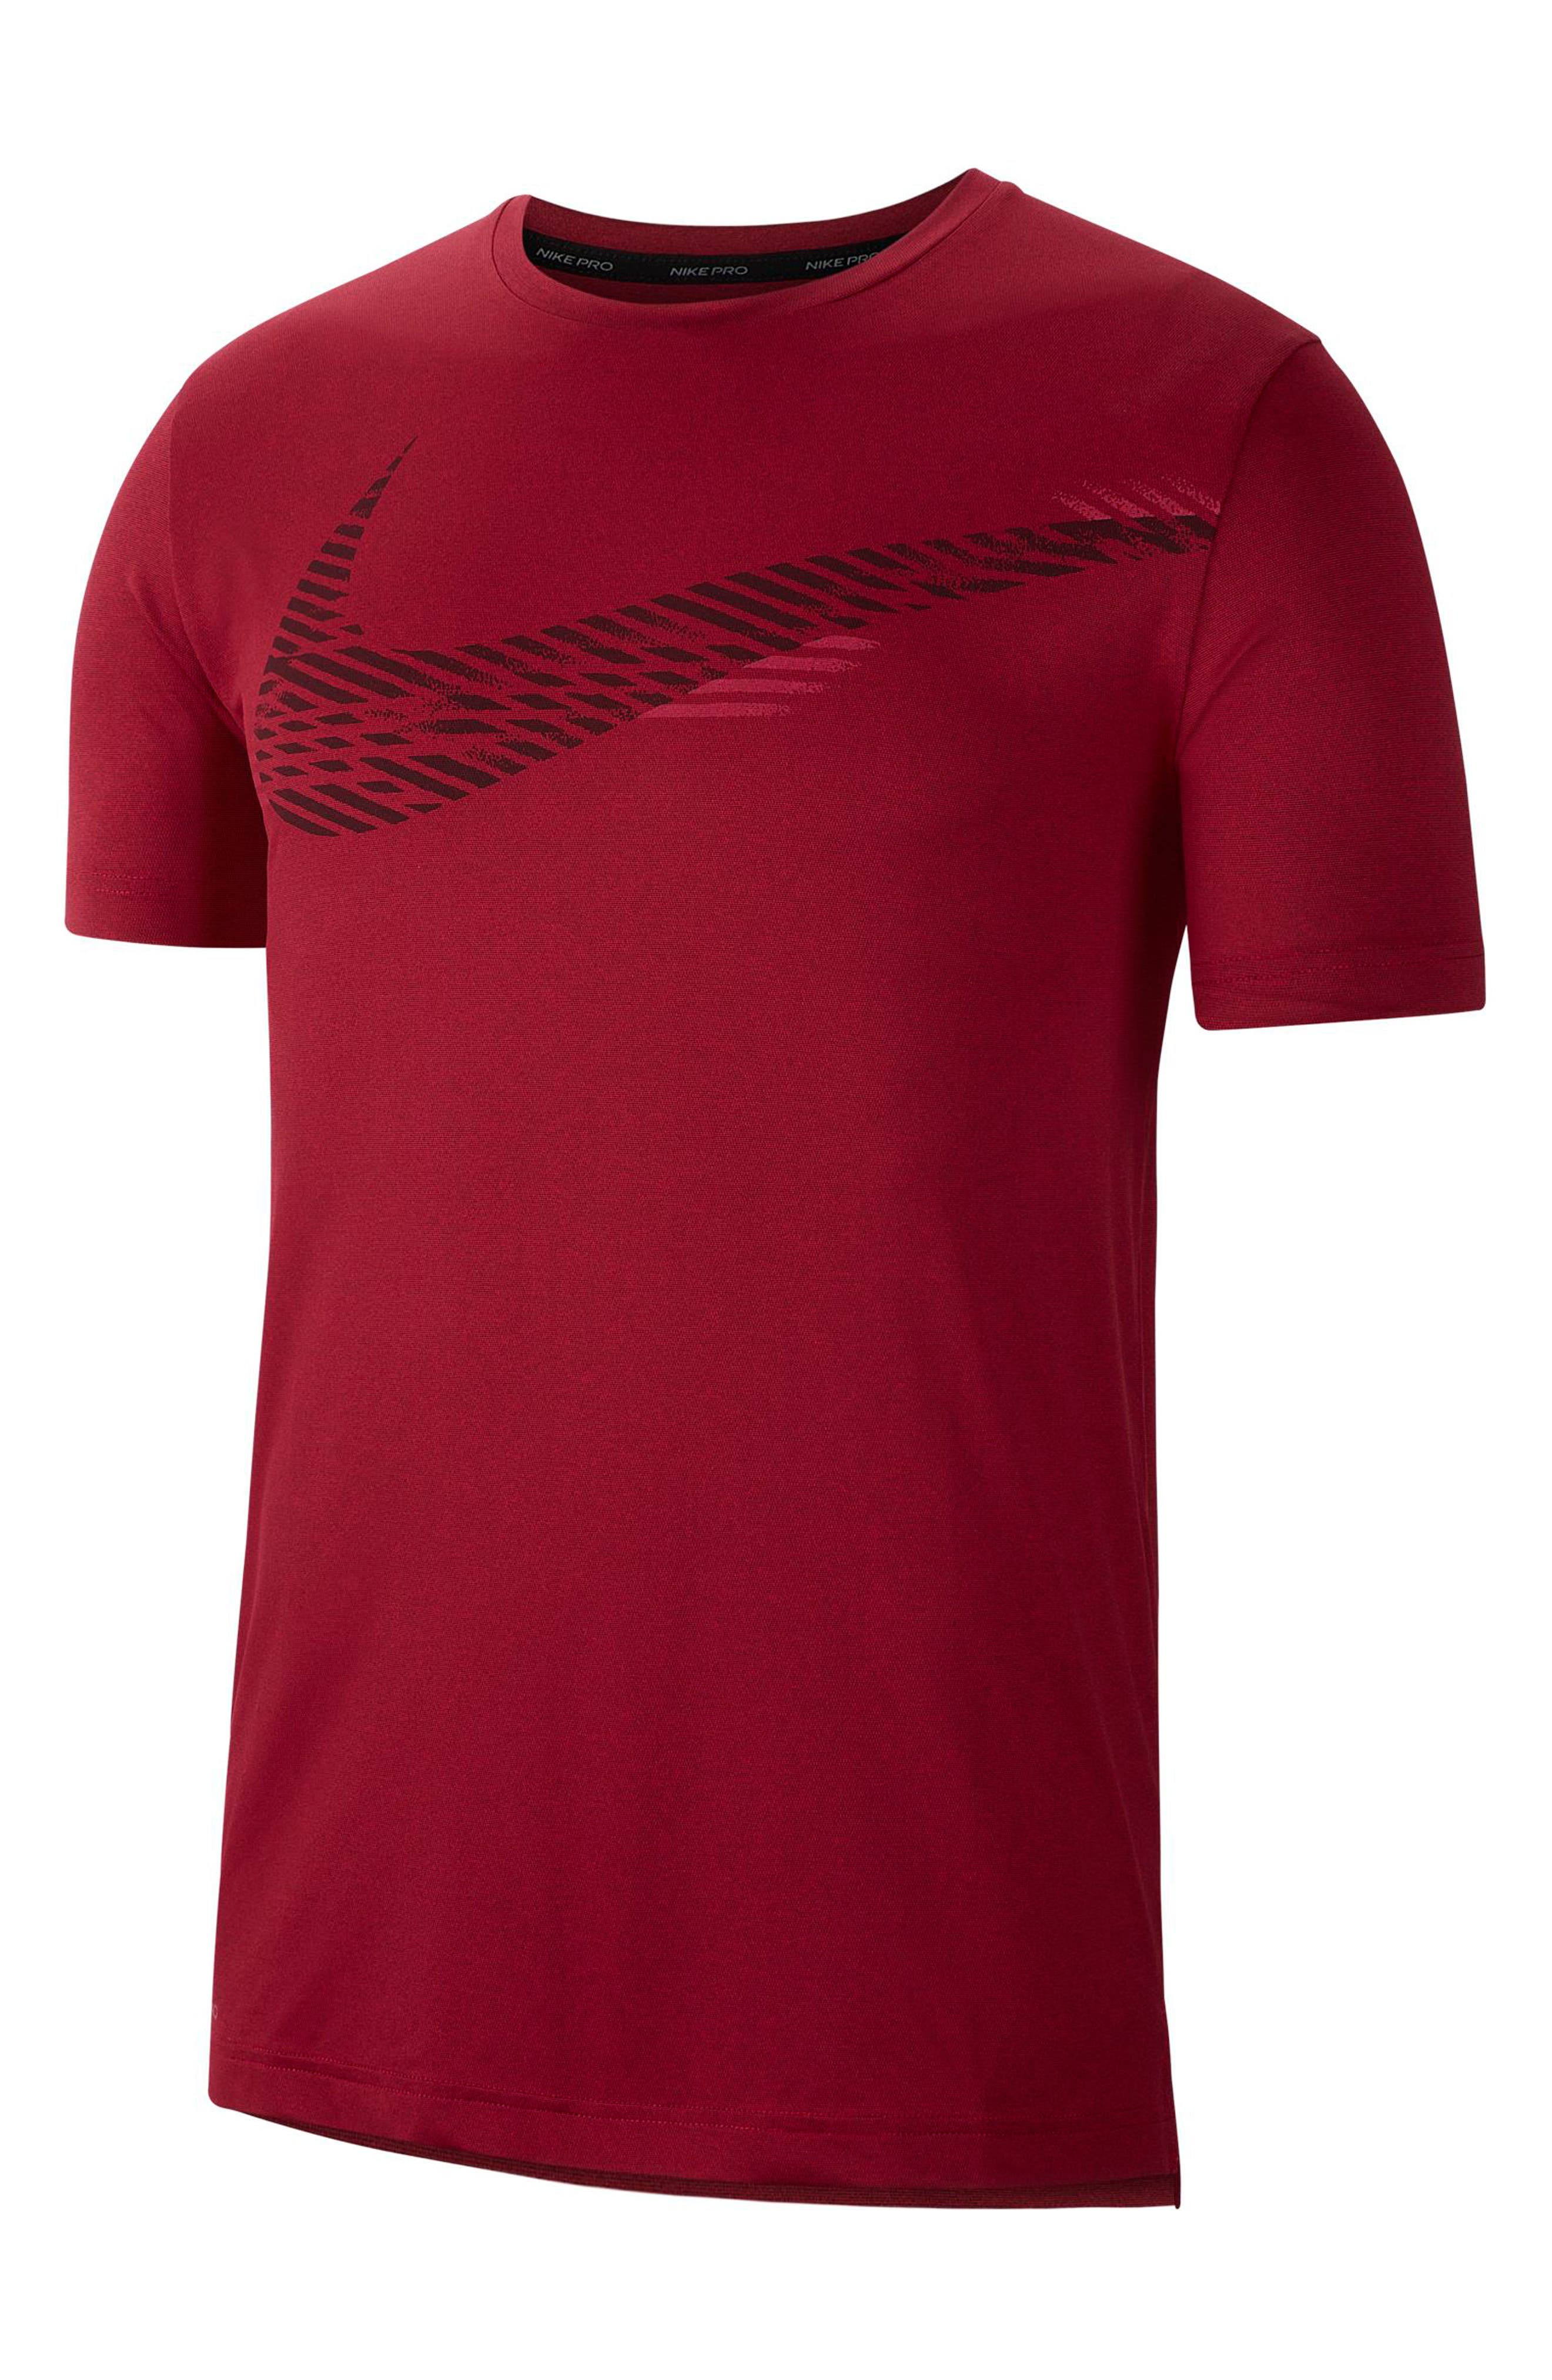 all red nike shirt